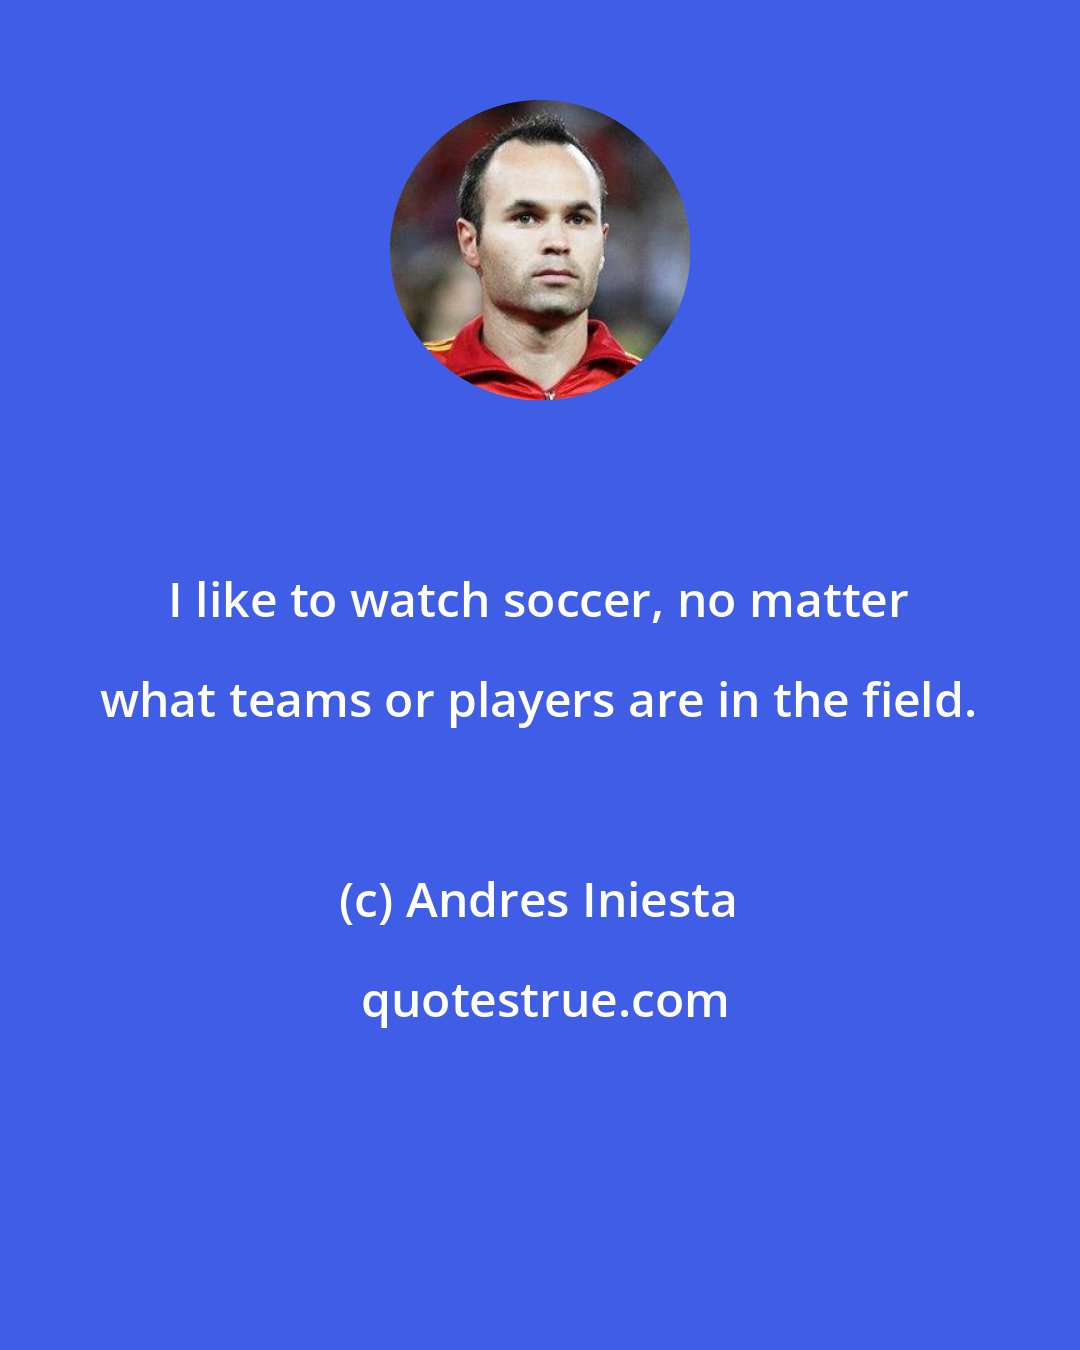 Andres Iniesta: I like to watch soccer, no matter what teams or players are in the field.